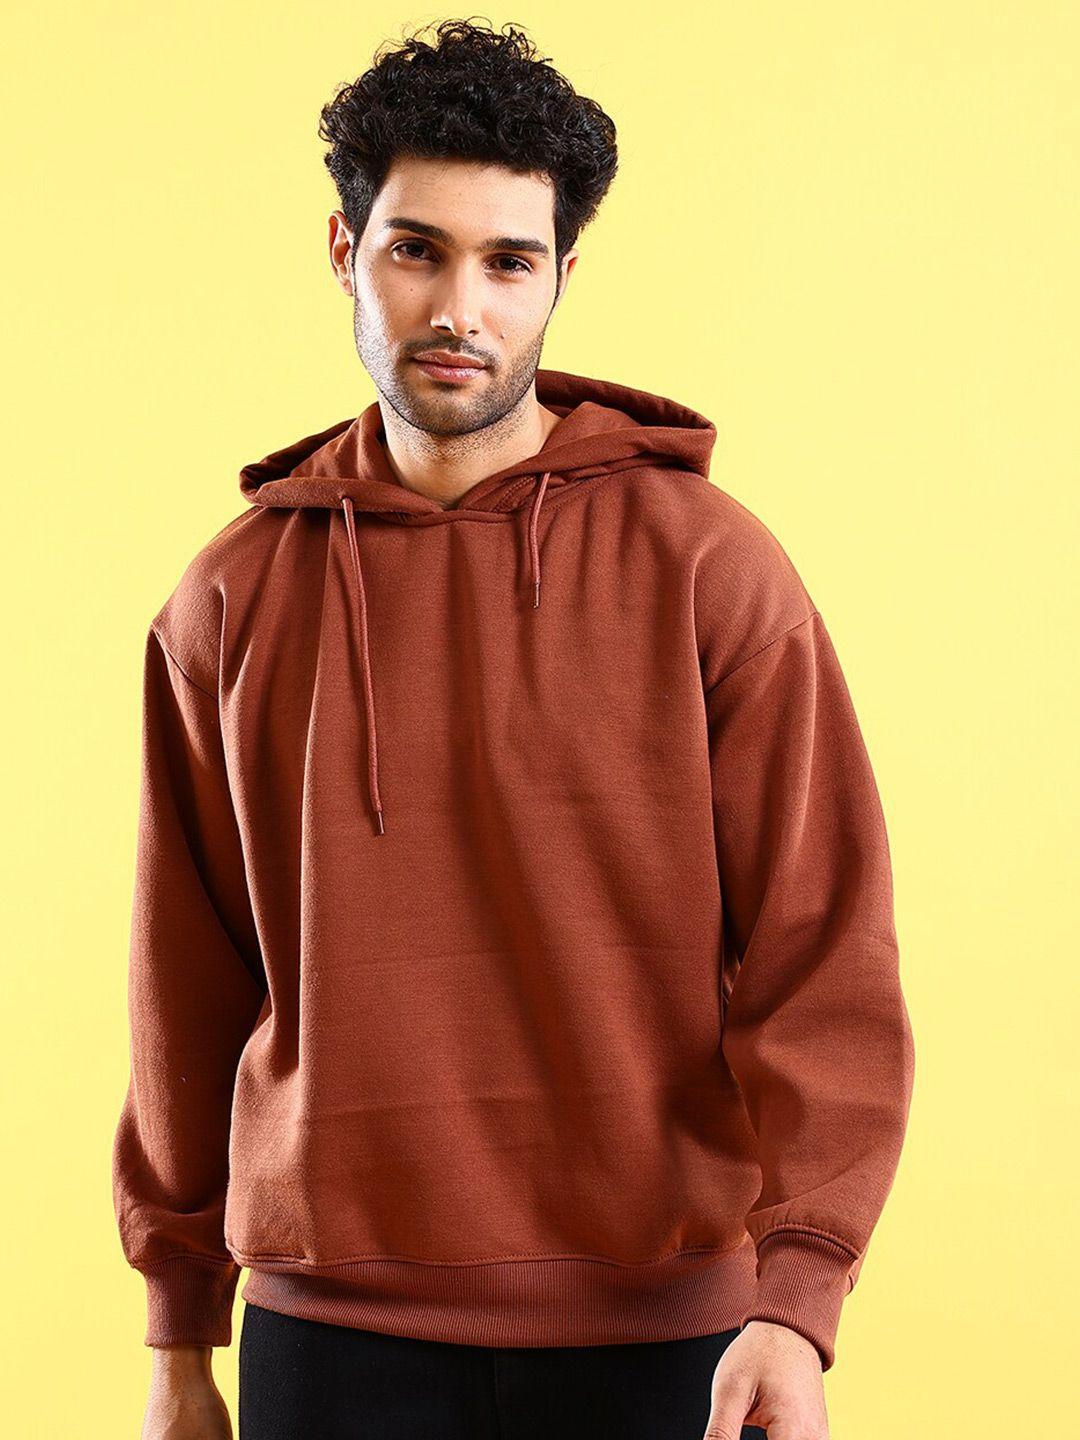 the-indian-garage-co-hooded-pullover-sweatshirt